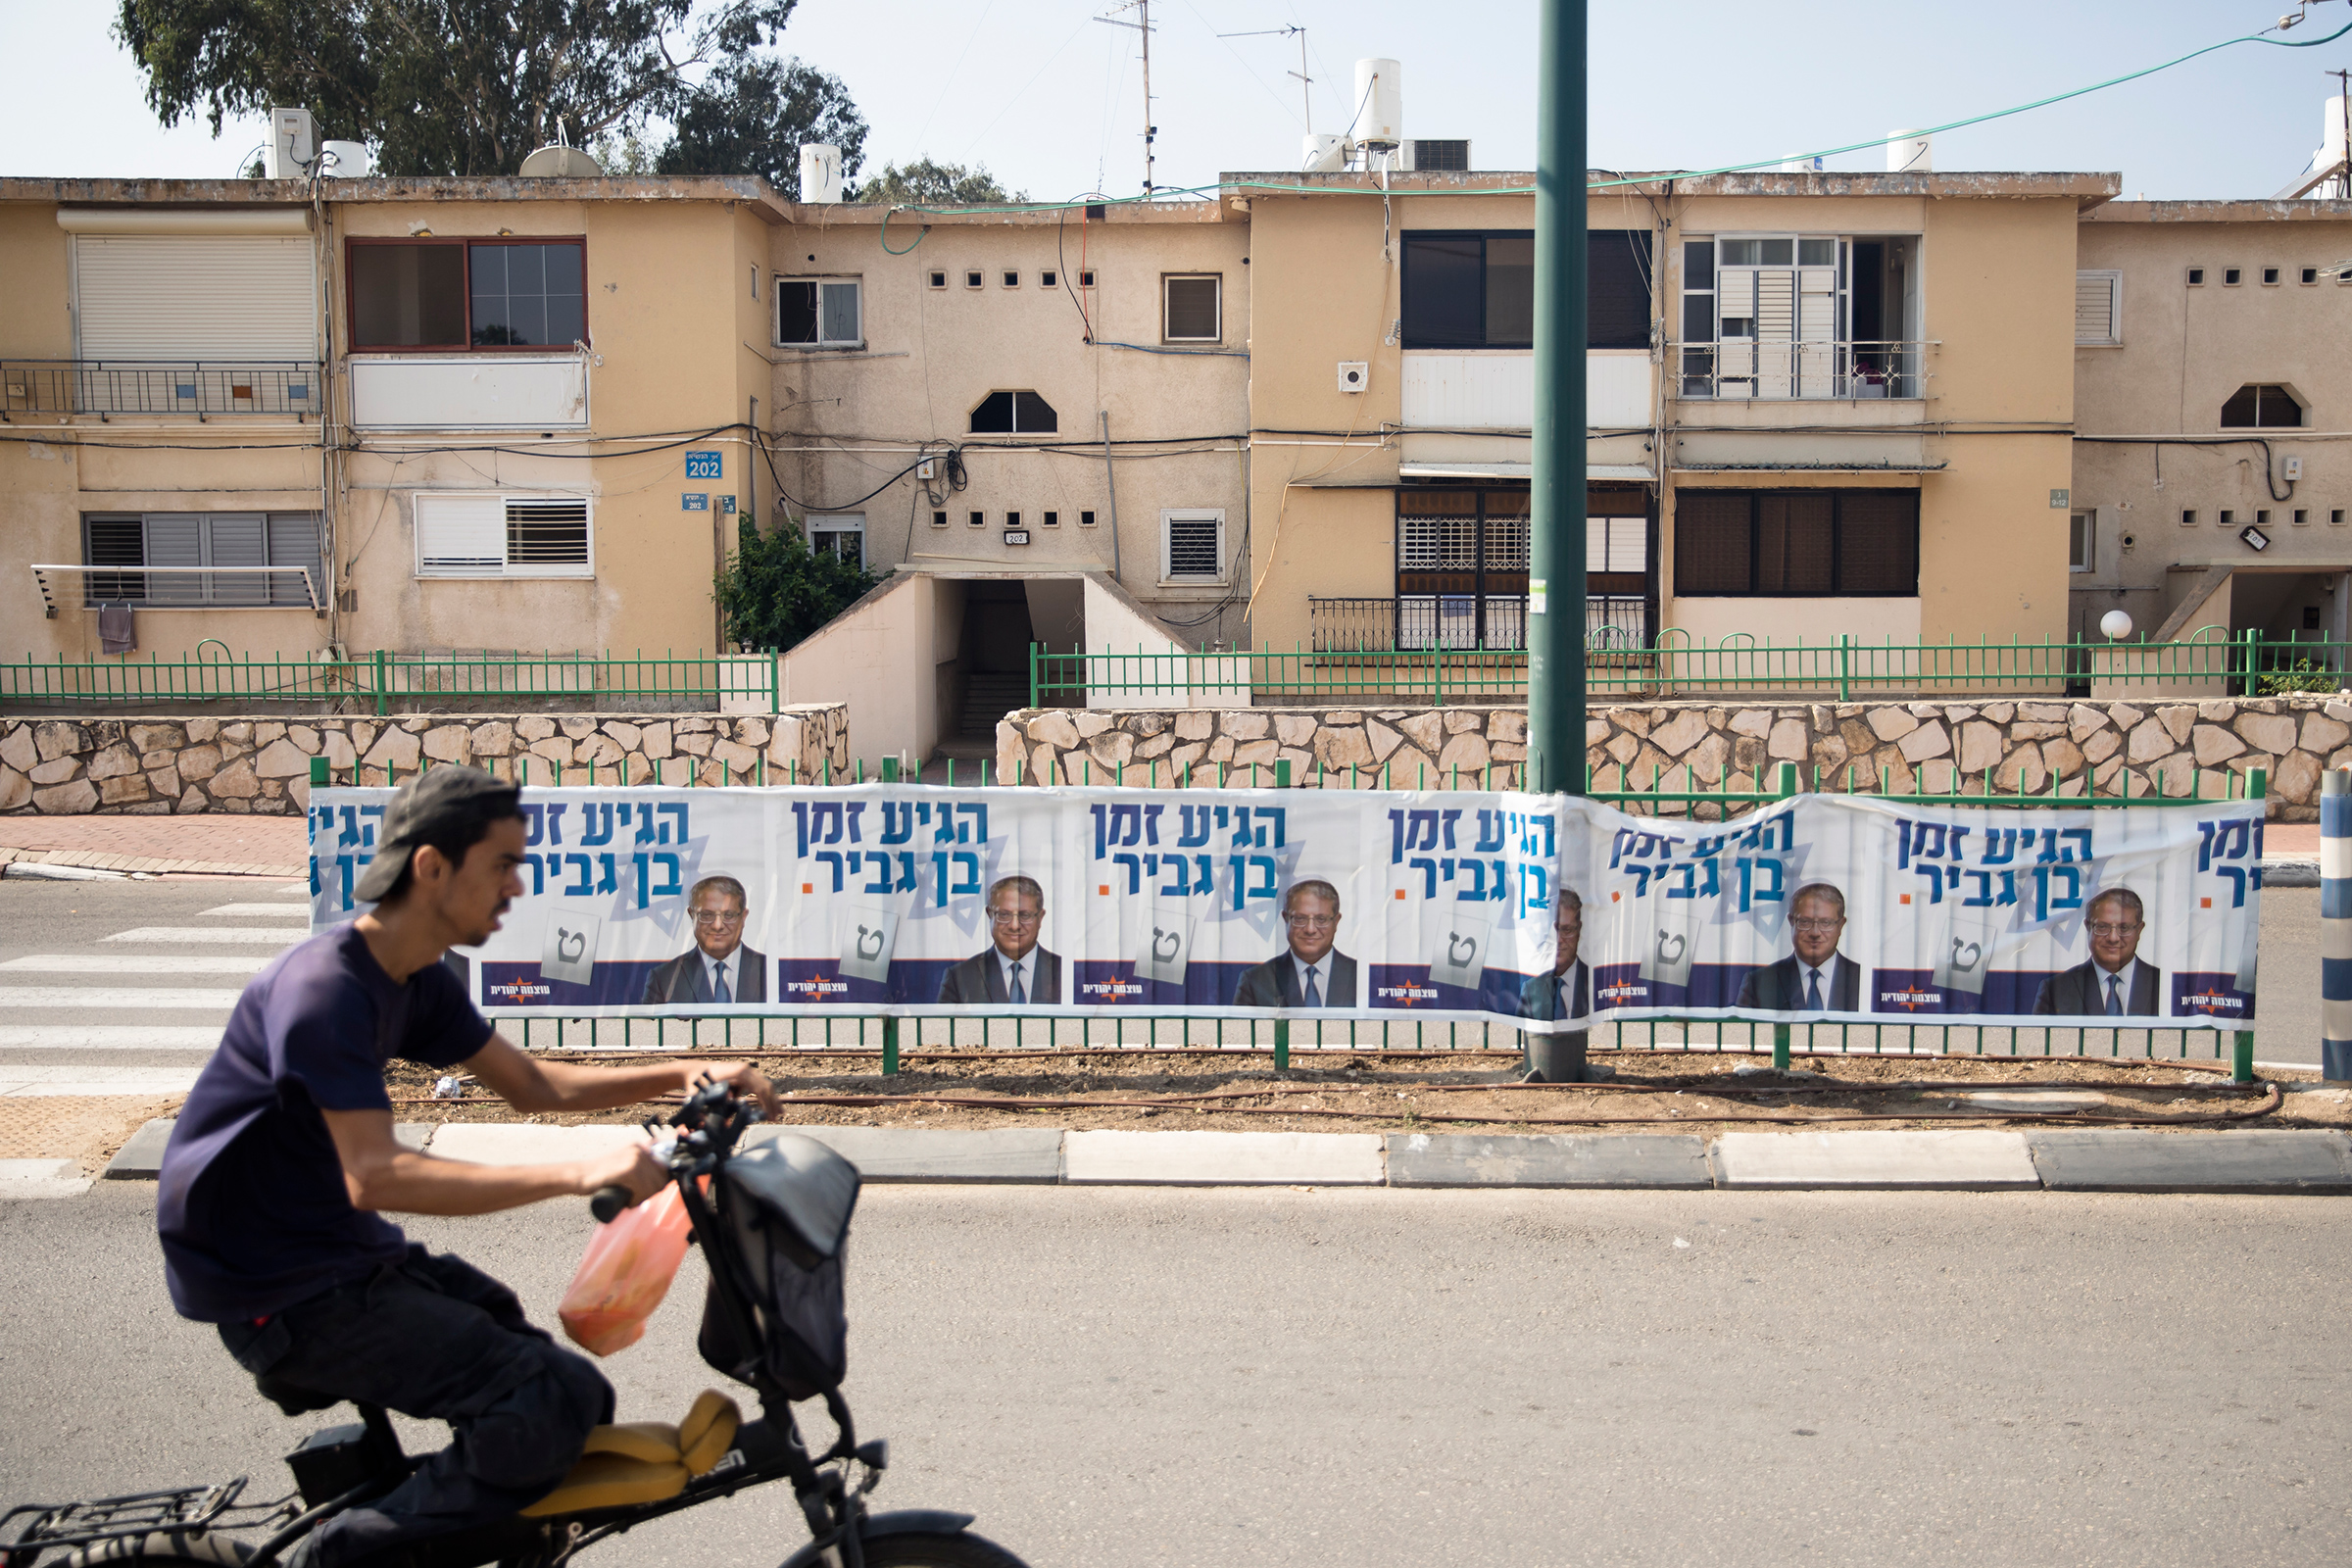 A man rides by a 'Jewish Zionist' party campaign poster showing party member Itamar Ben-Gvir on Oct. 27 in Or Akiva, Israel. Israelis return to the polls on Nov. 1 for a fifth general election in four years. (Amir Levy—Getty Images)